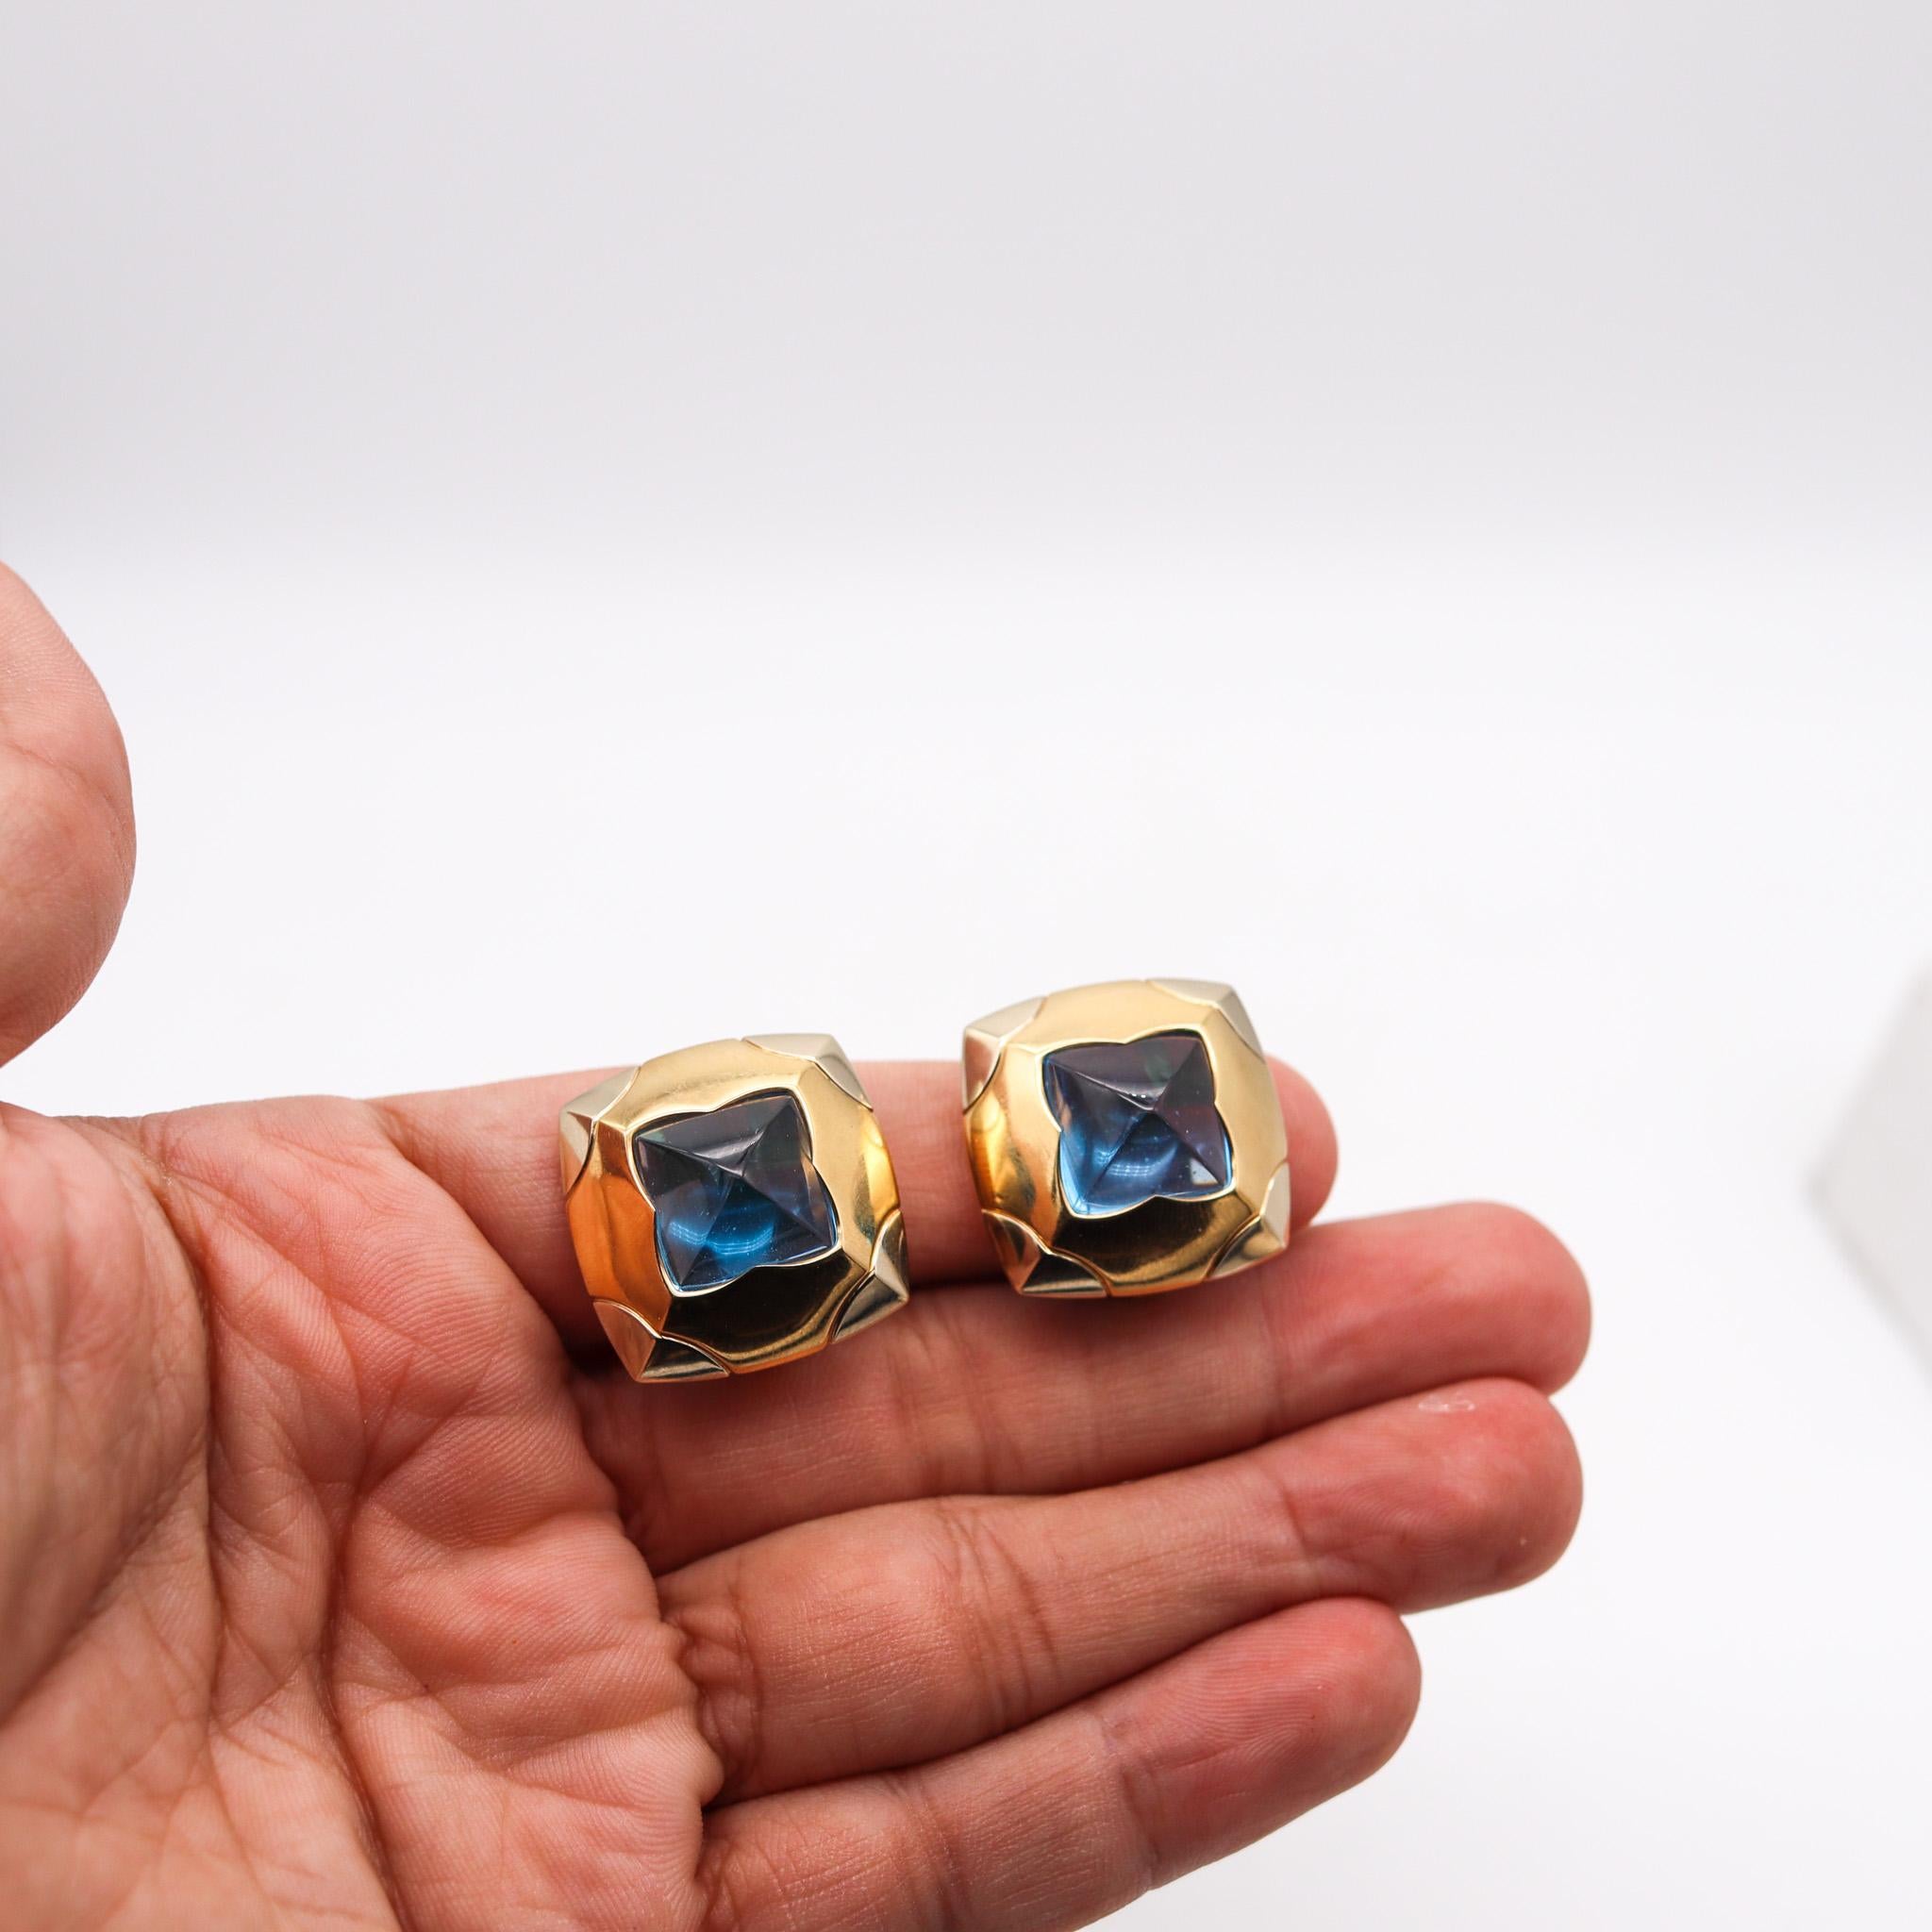 Bvlgari Roma Pyramid Clips Earrings in 18kt Gold with 36ctw Carved Blue Topaz In Excellent Condition For Sale In Miami, FL